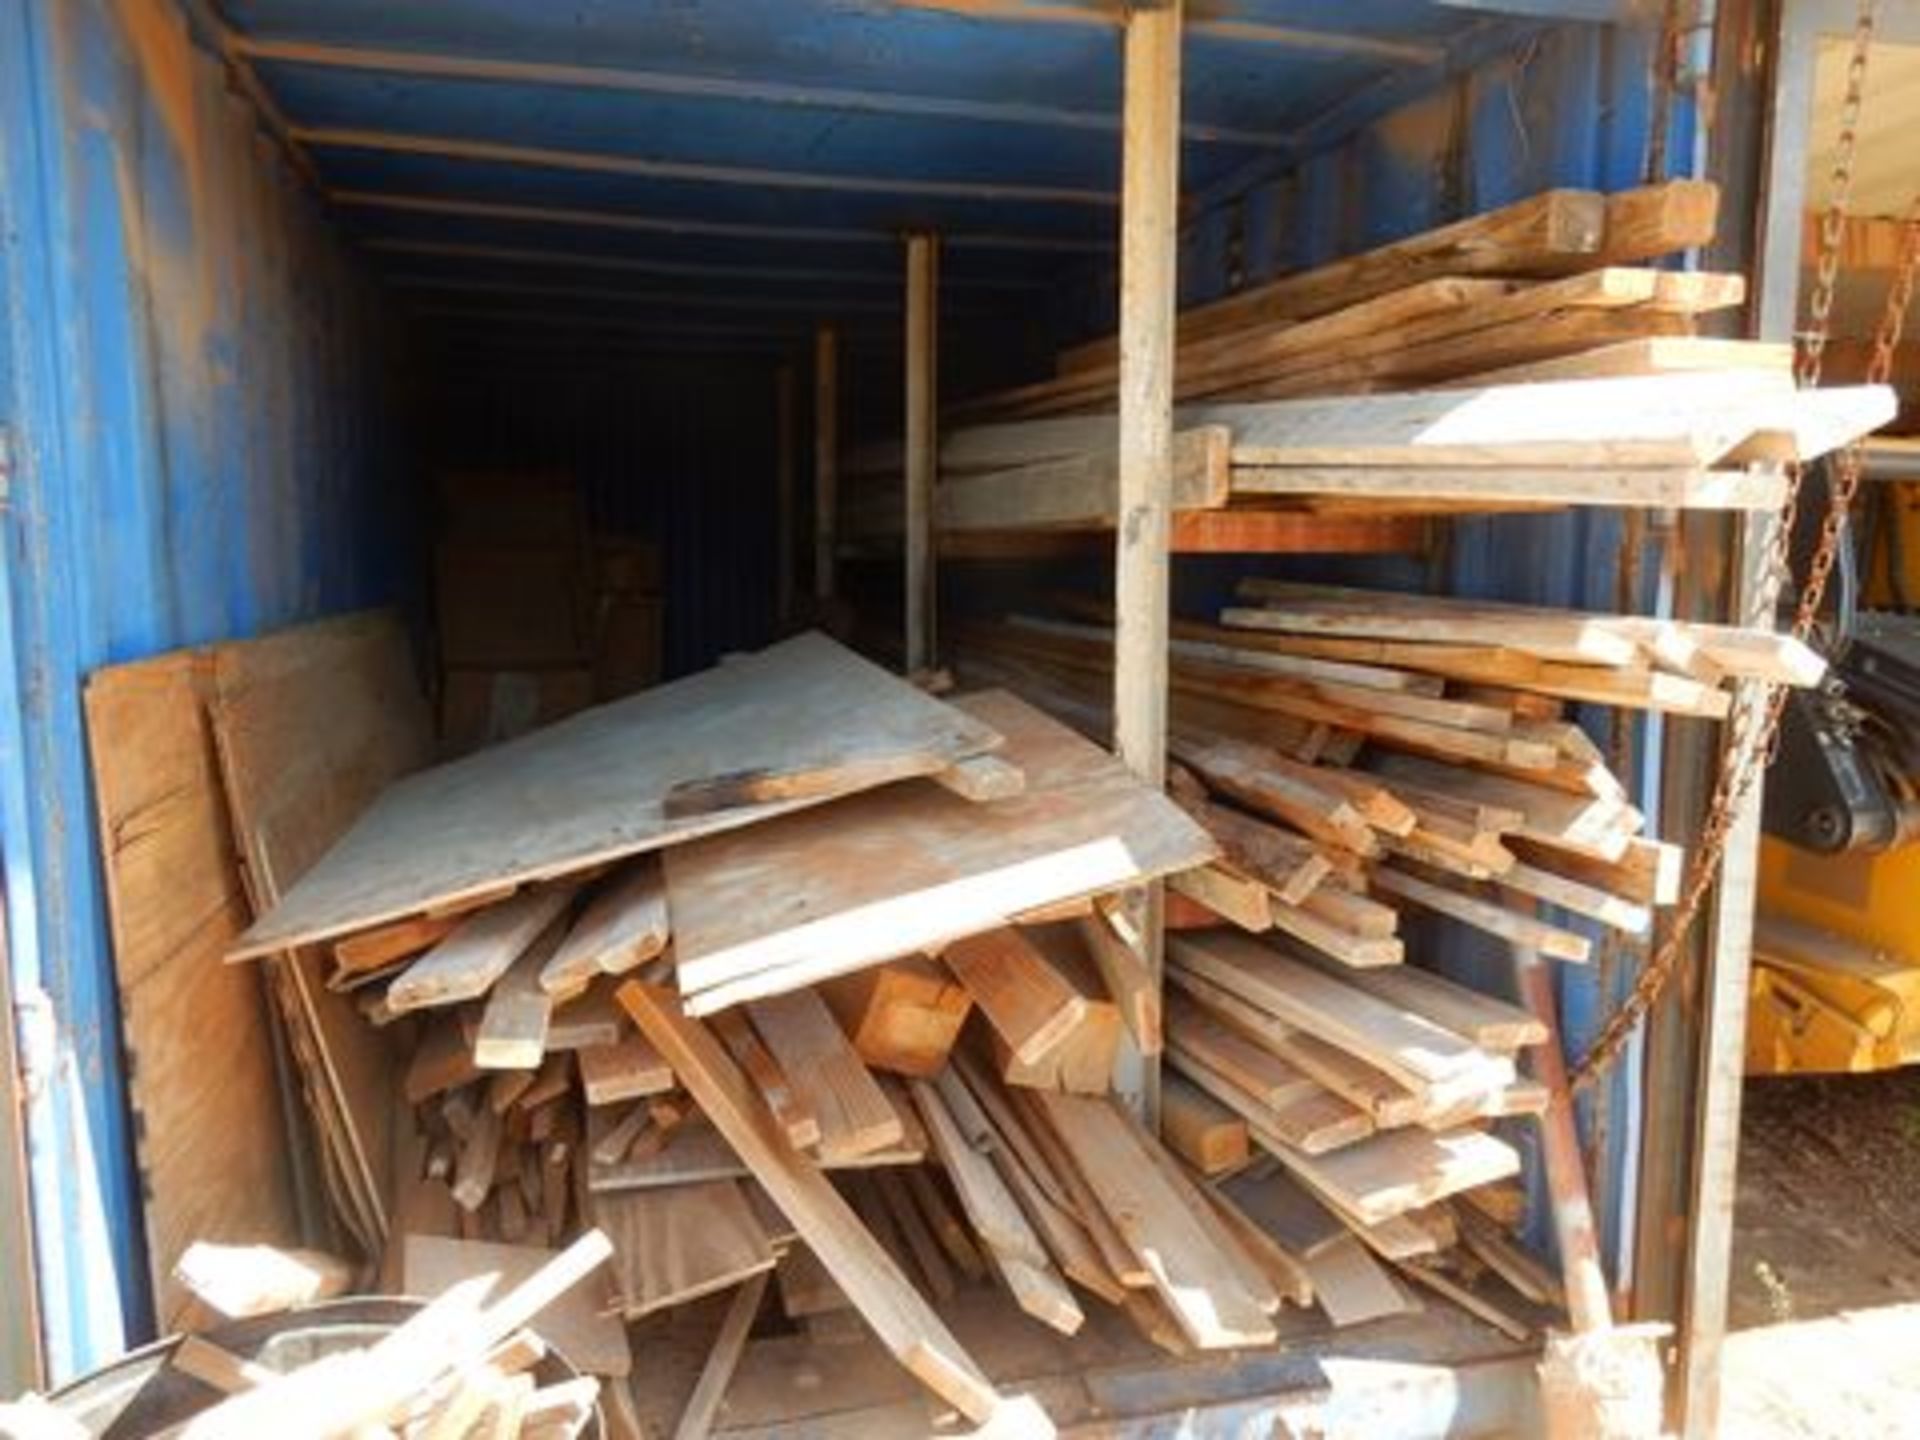 LOT CONTENTS OF CONTAINER TO INCLUDE - PLYWOOD SHEETS, 2 X 4 & 2 X 6 LUMBER, ETC.